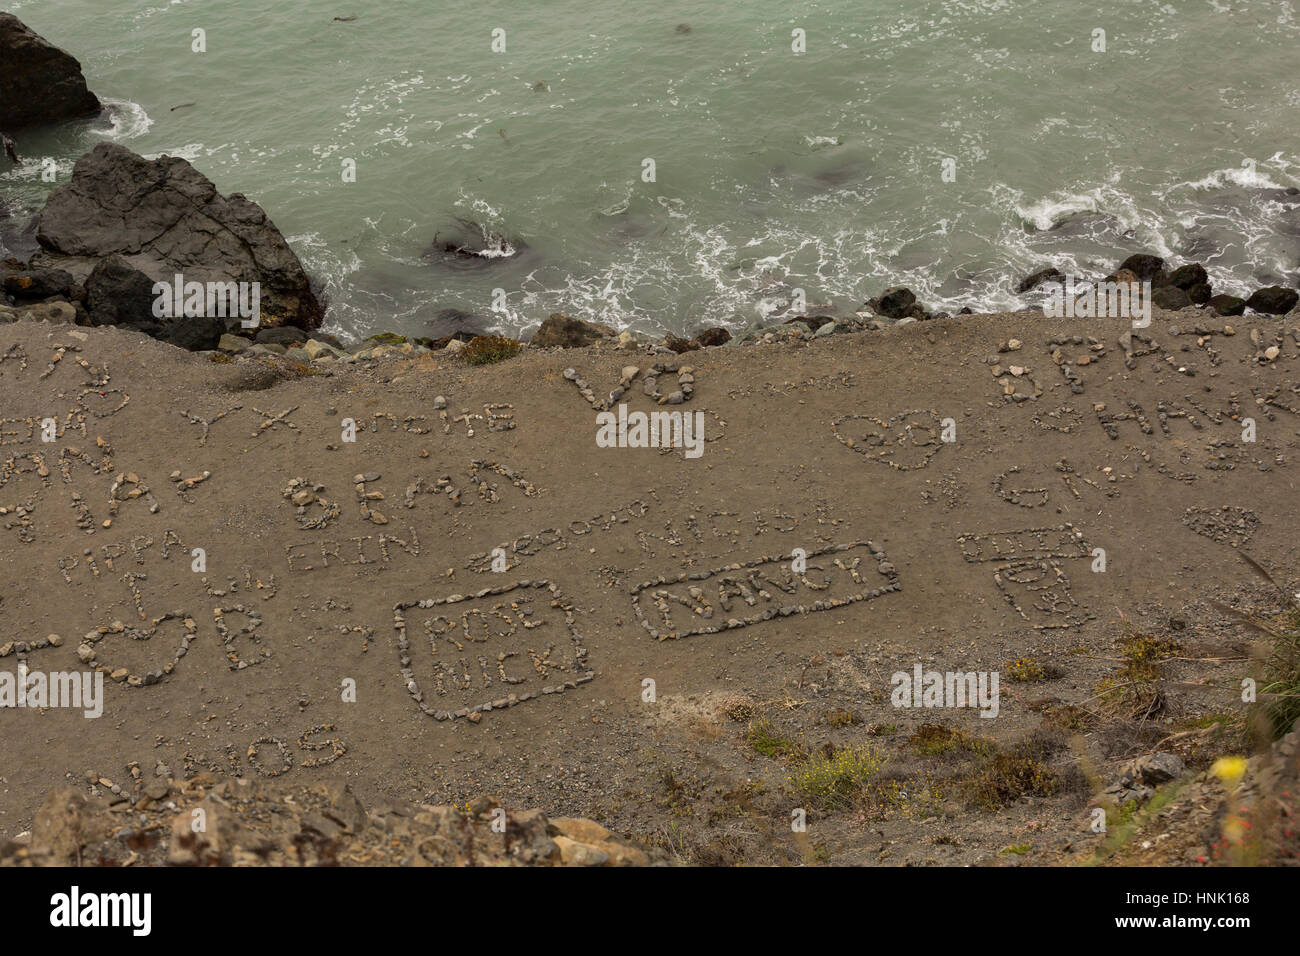 Names and messages of love on the beach. Big Sur. Aug, 2016. California, U.S.A. Stock Photo